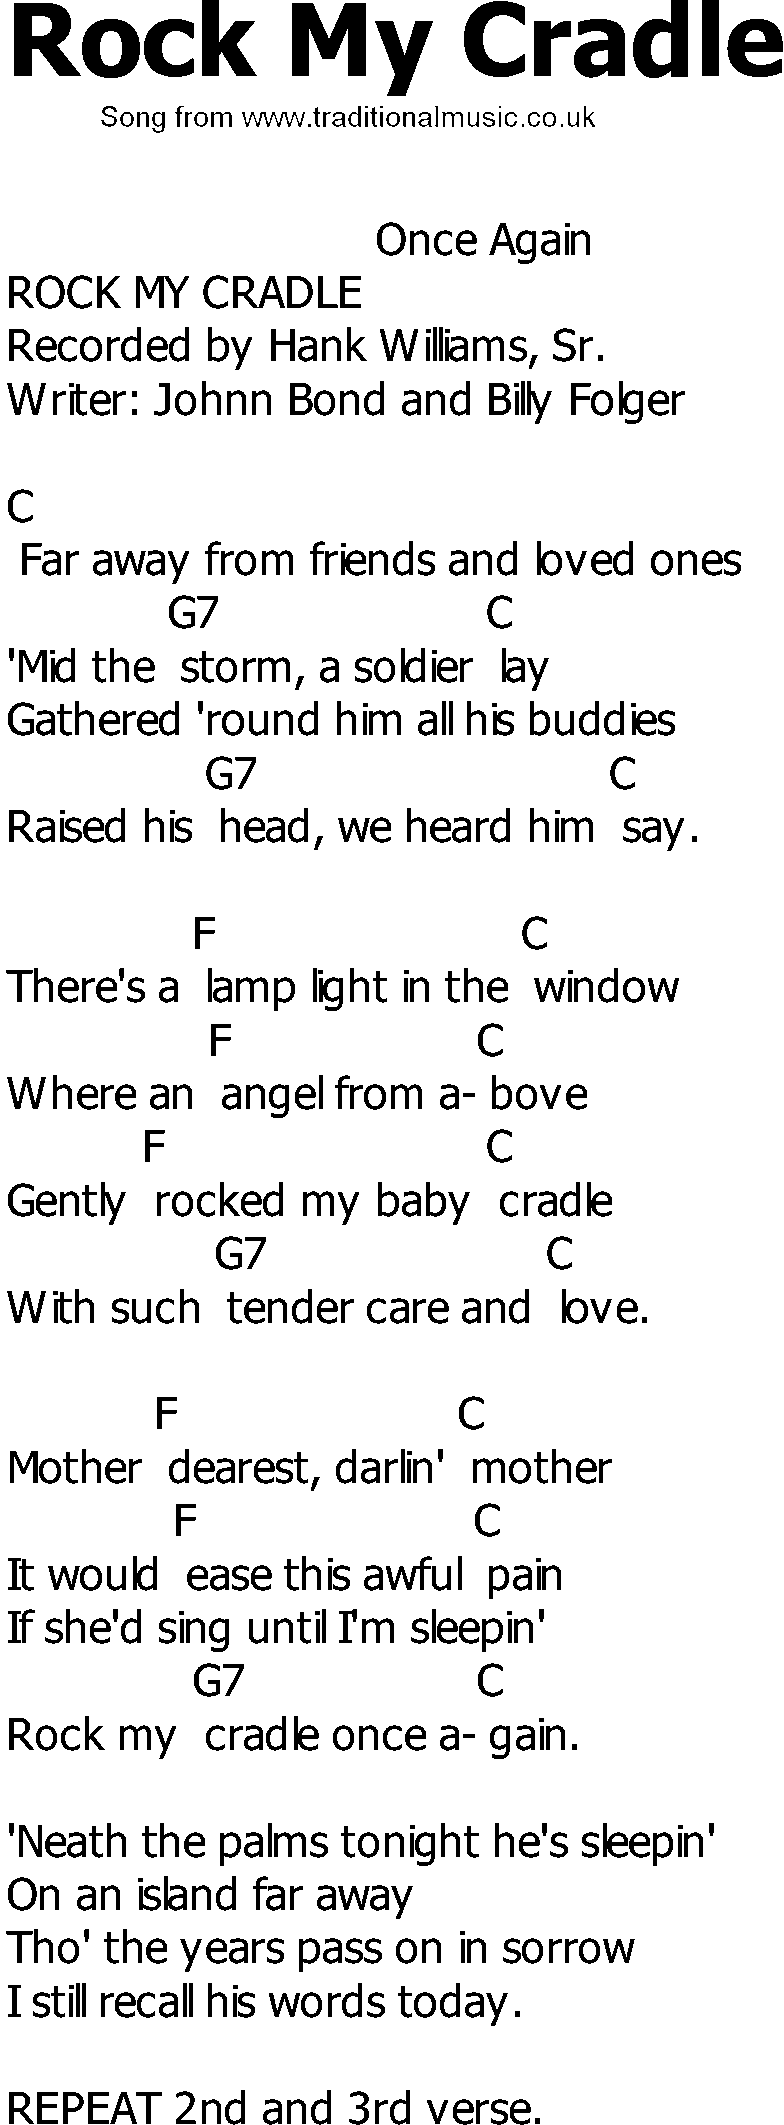 Old Country song lyrics with chords - Rock My Cradle